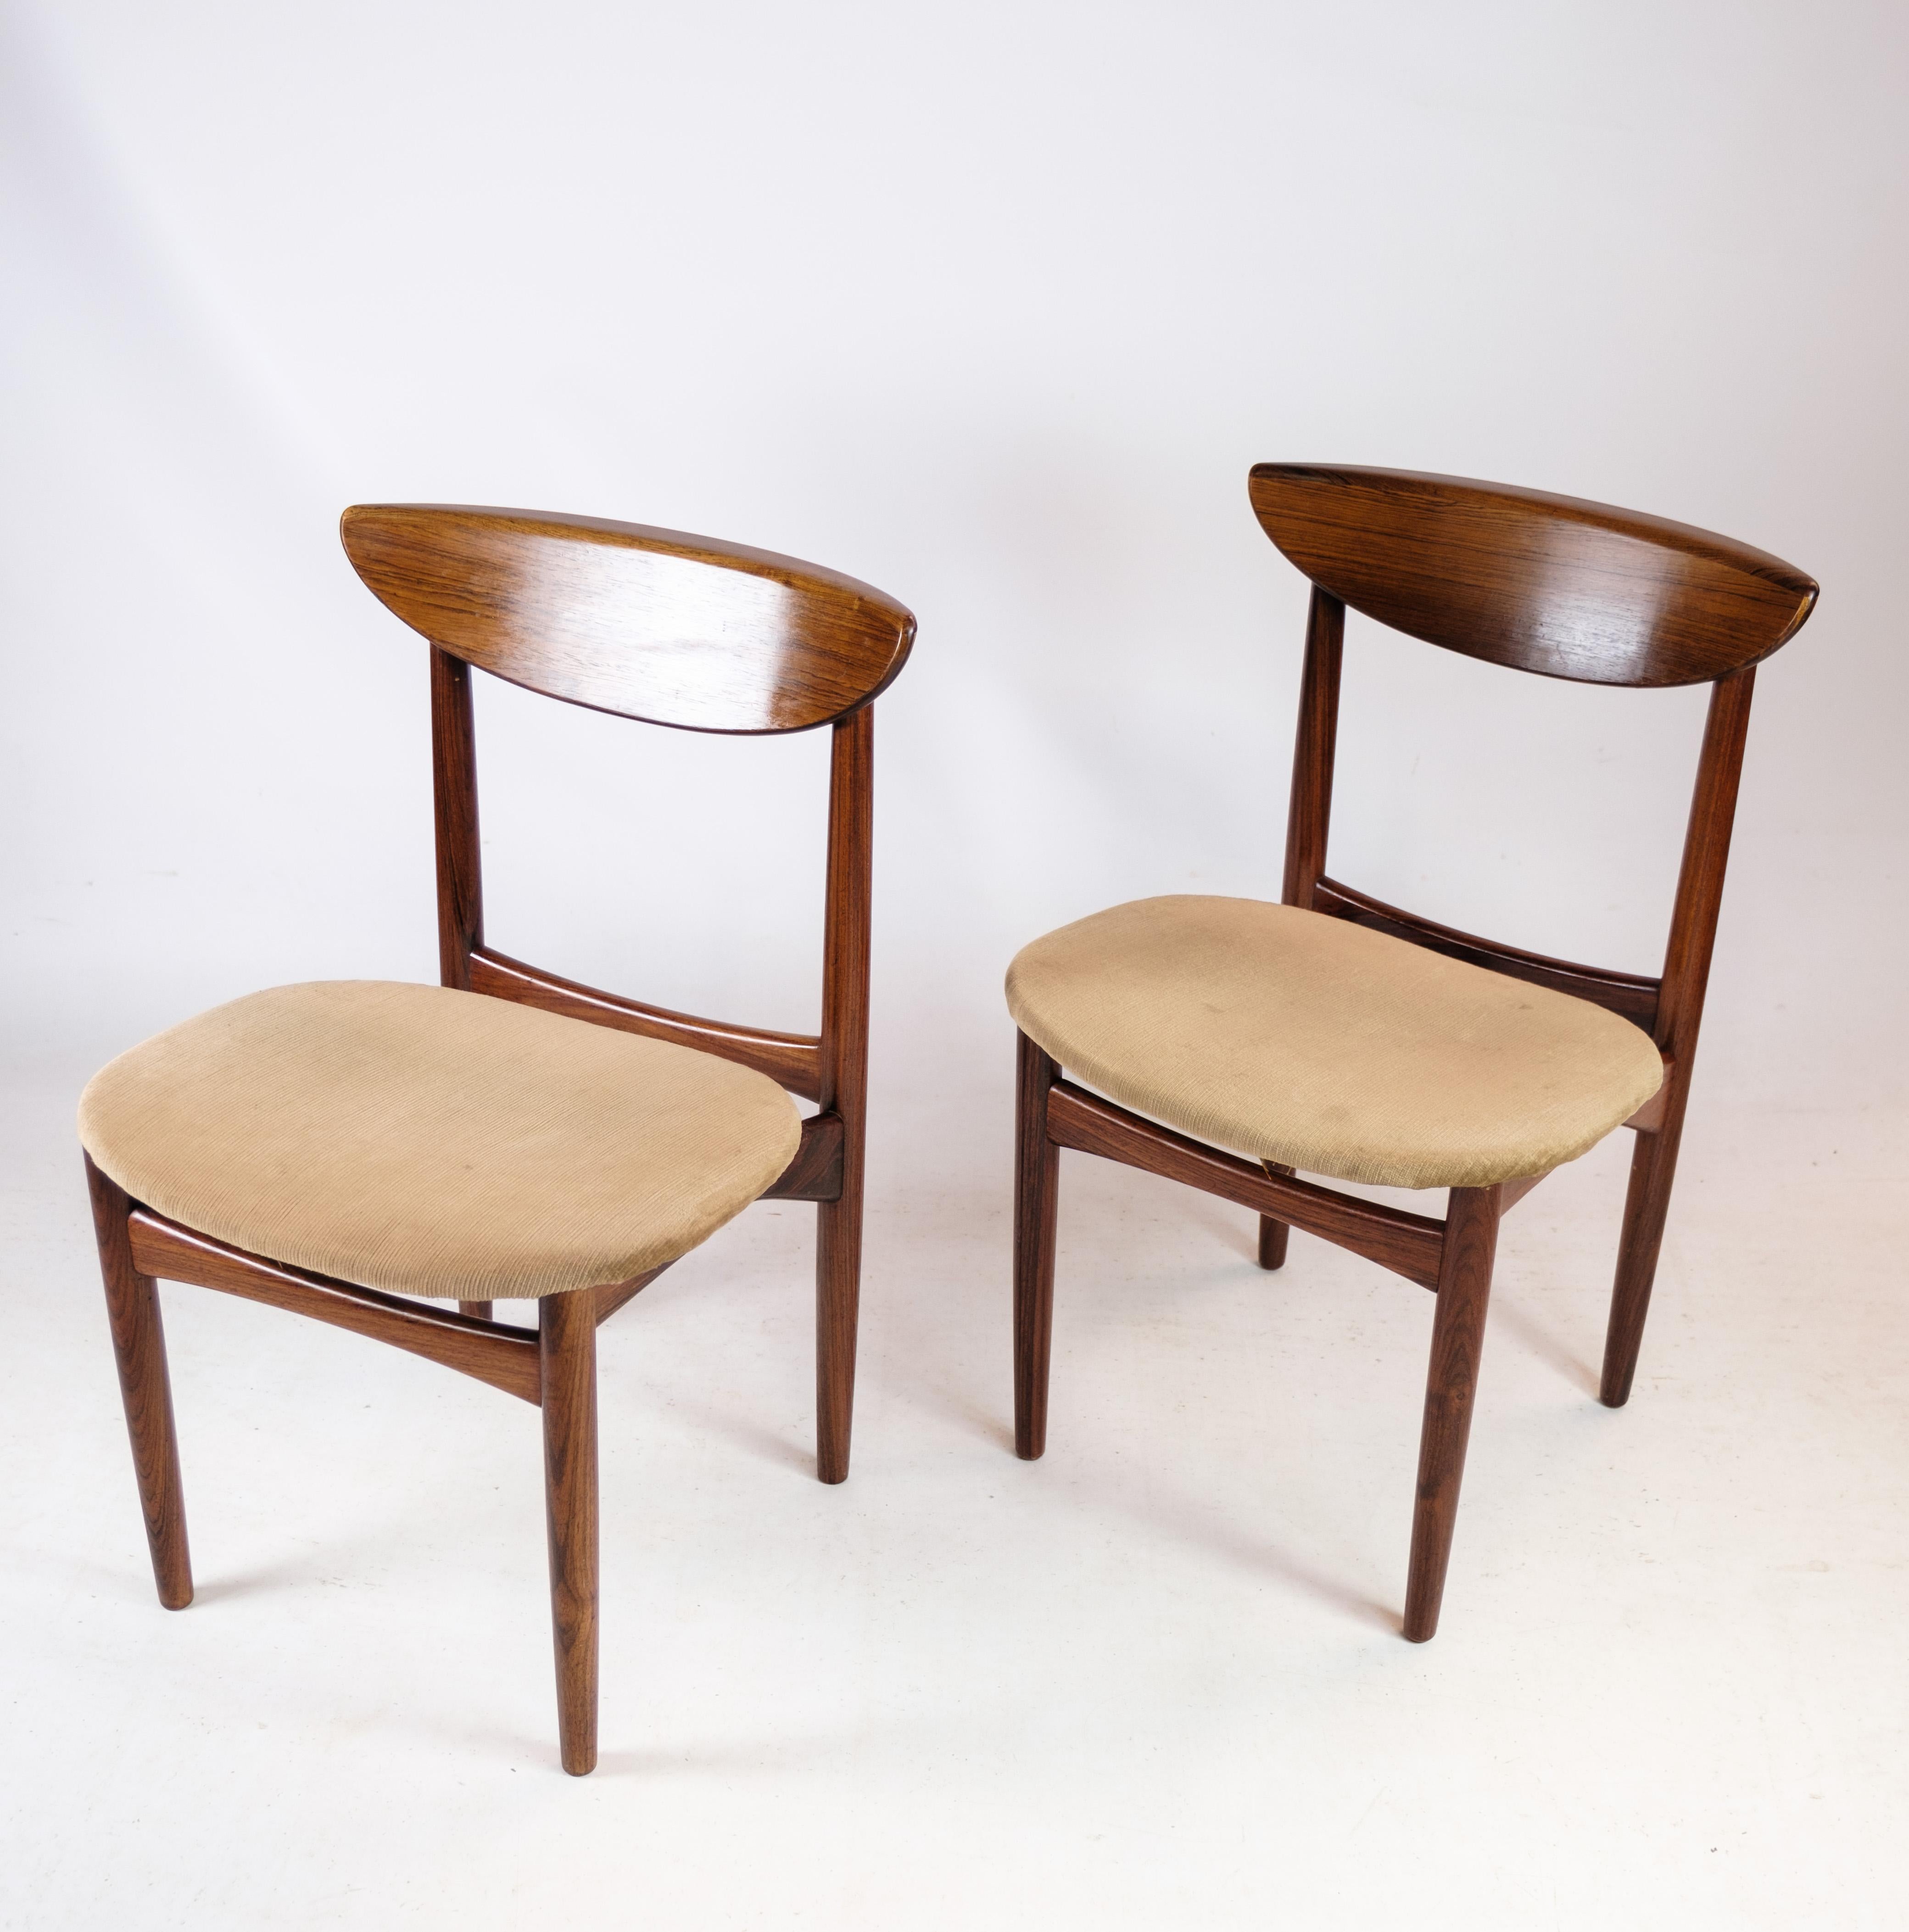 Mid-20th Century Set of 2 Chairs Made In Rosewood By Peter Hvidt From 1960s For Sale